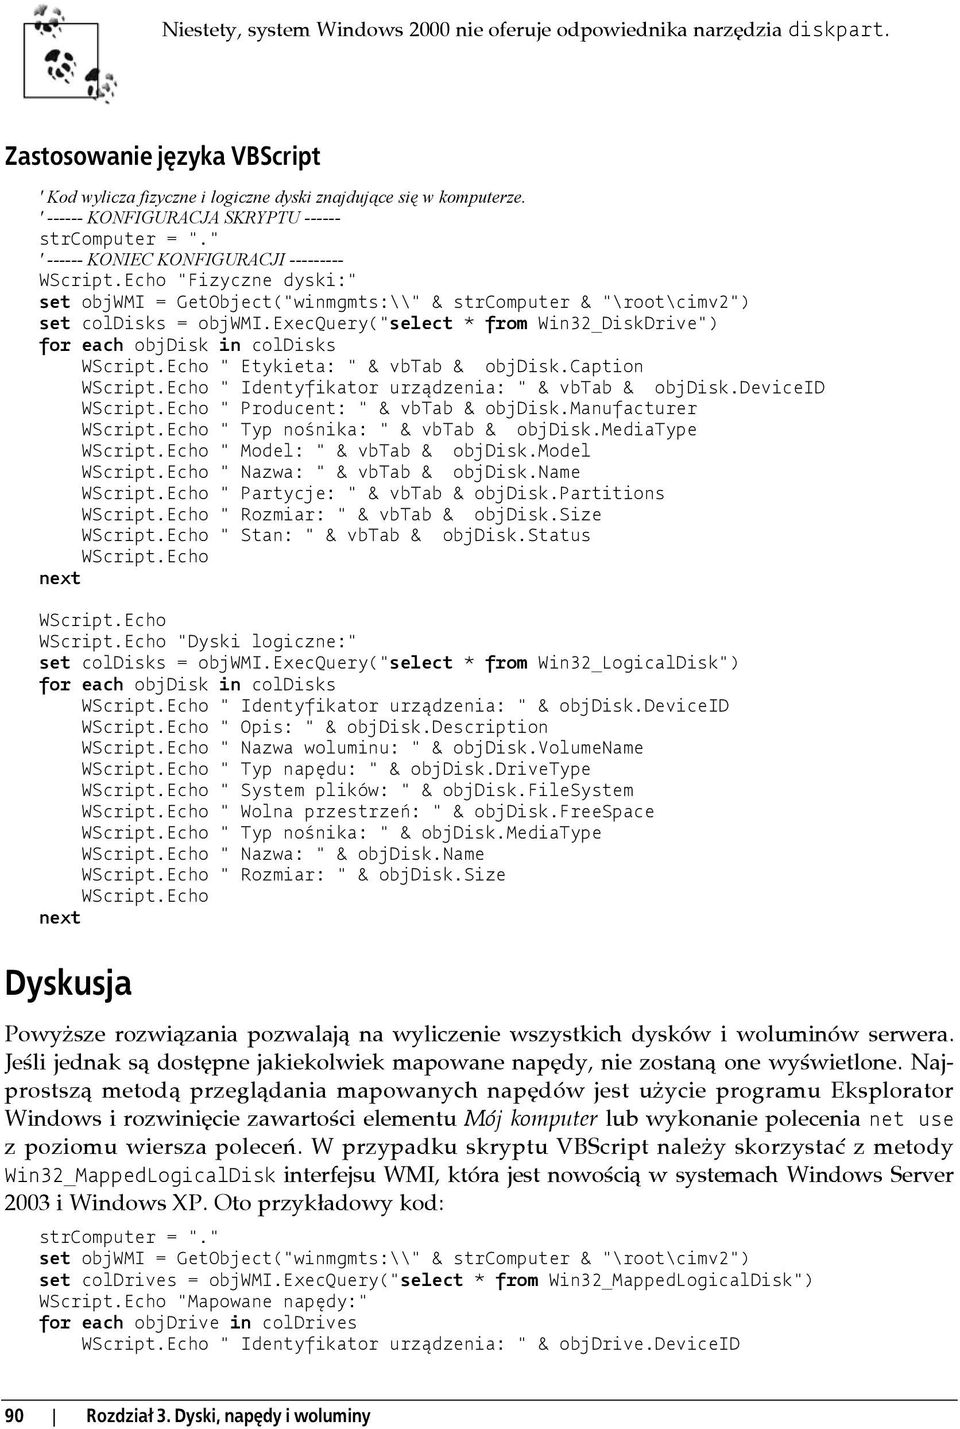 Echo "Fizyczne dyski:" set objwmi = GetObject("winmgmts:\\" & strcomputer & "\root\cimv2") set coldisks = objwmi.execquery("select * from Win32_DiskDrive") for each objdisk in coldisks WScript.